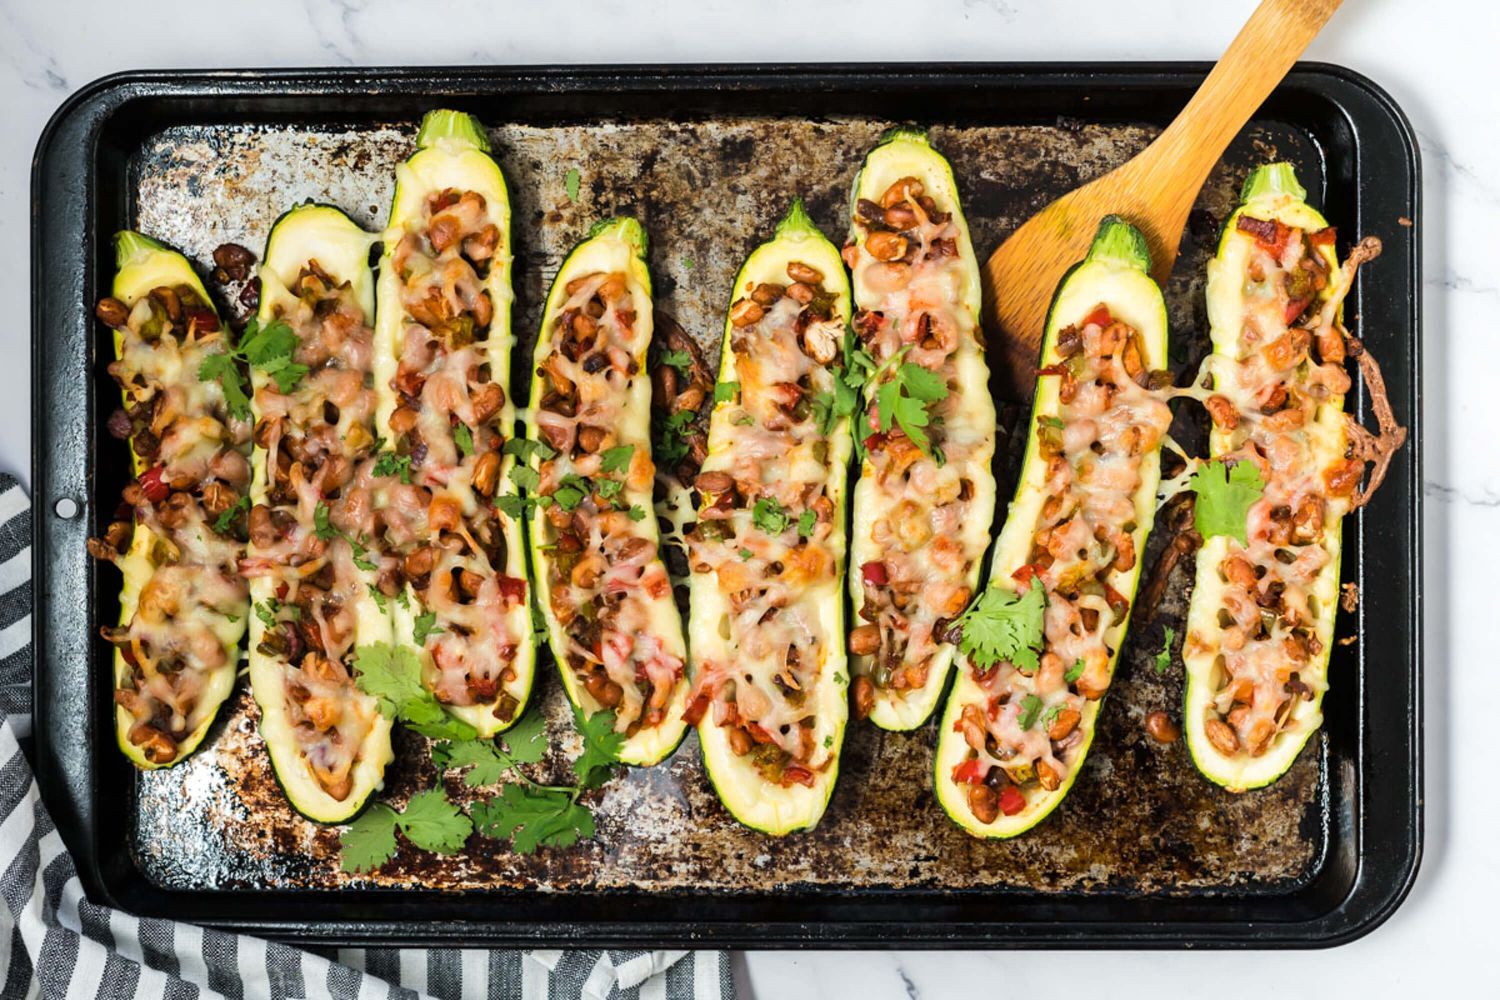 Fajita stuffed zucchini with pinto beans on a baking sheet with beans, peppers, onions, and melted cheese.